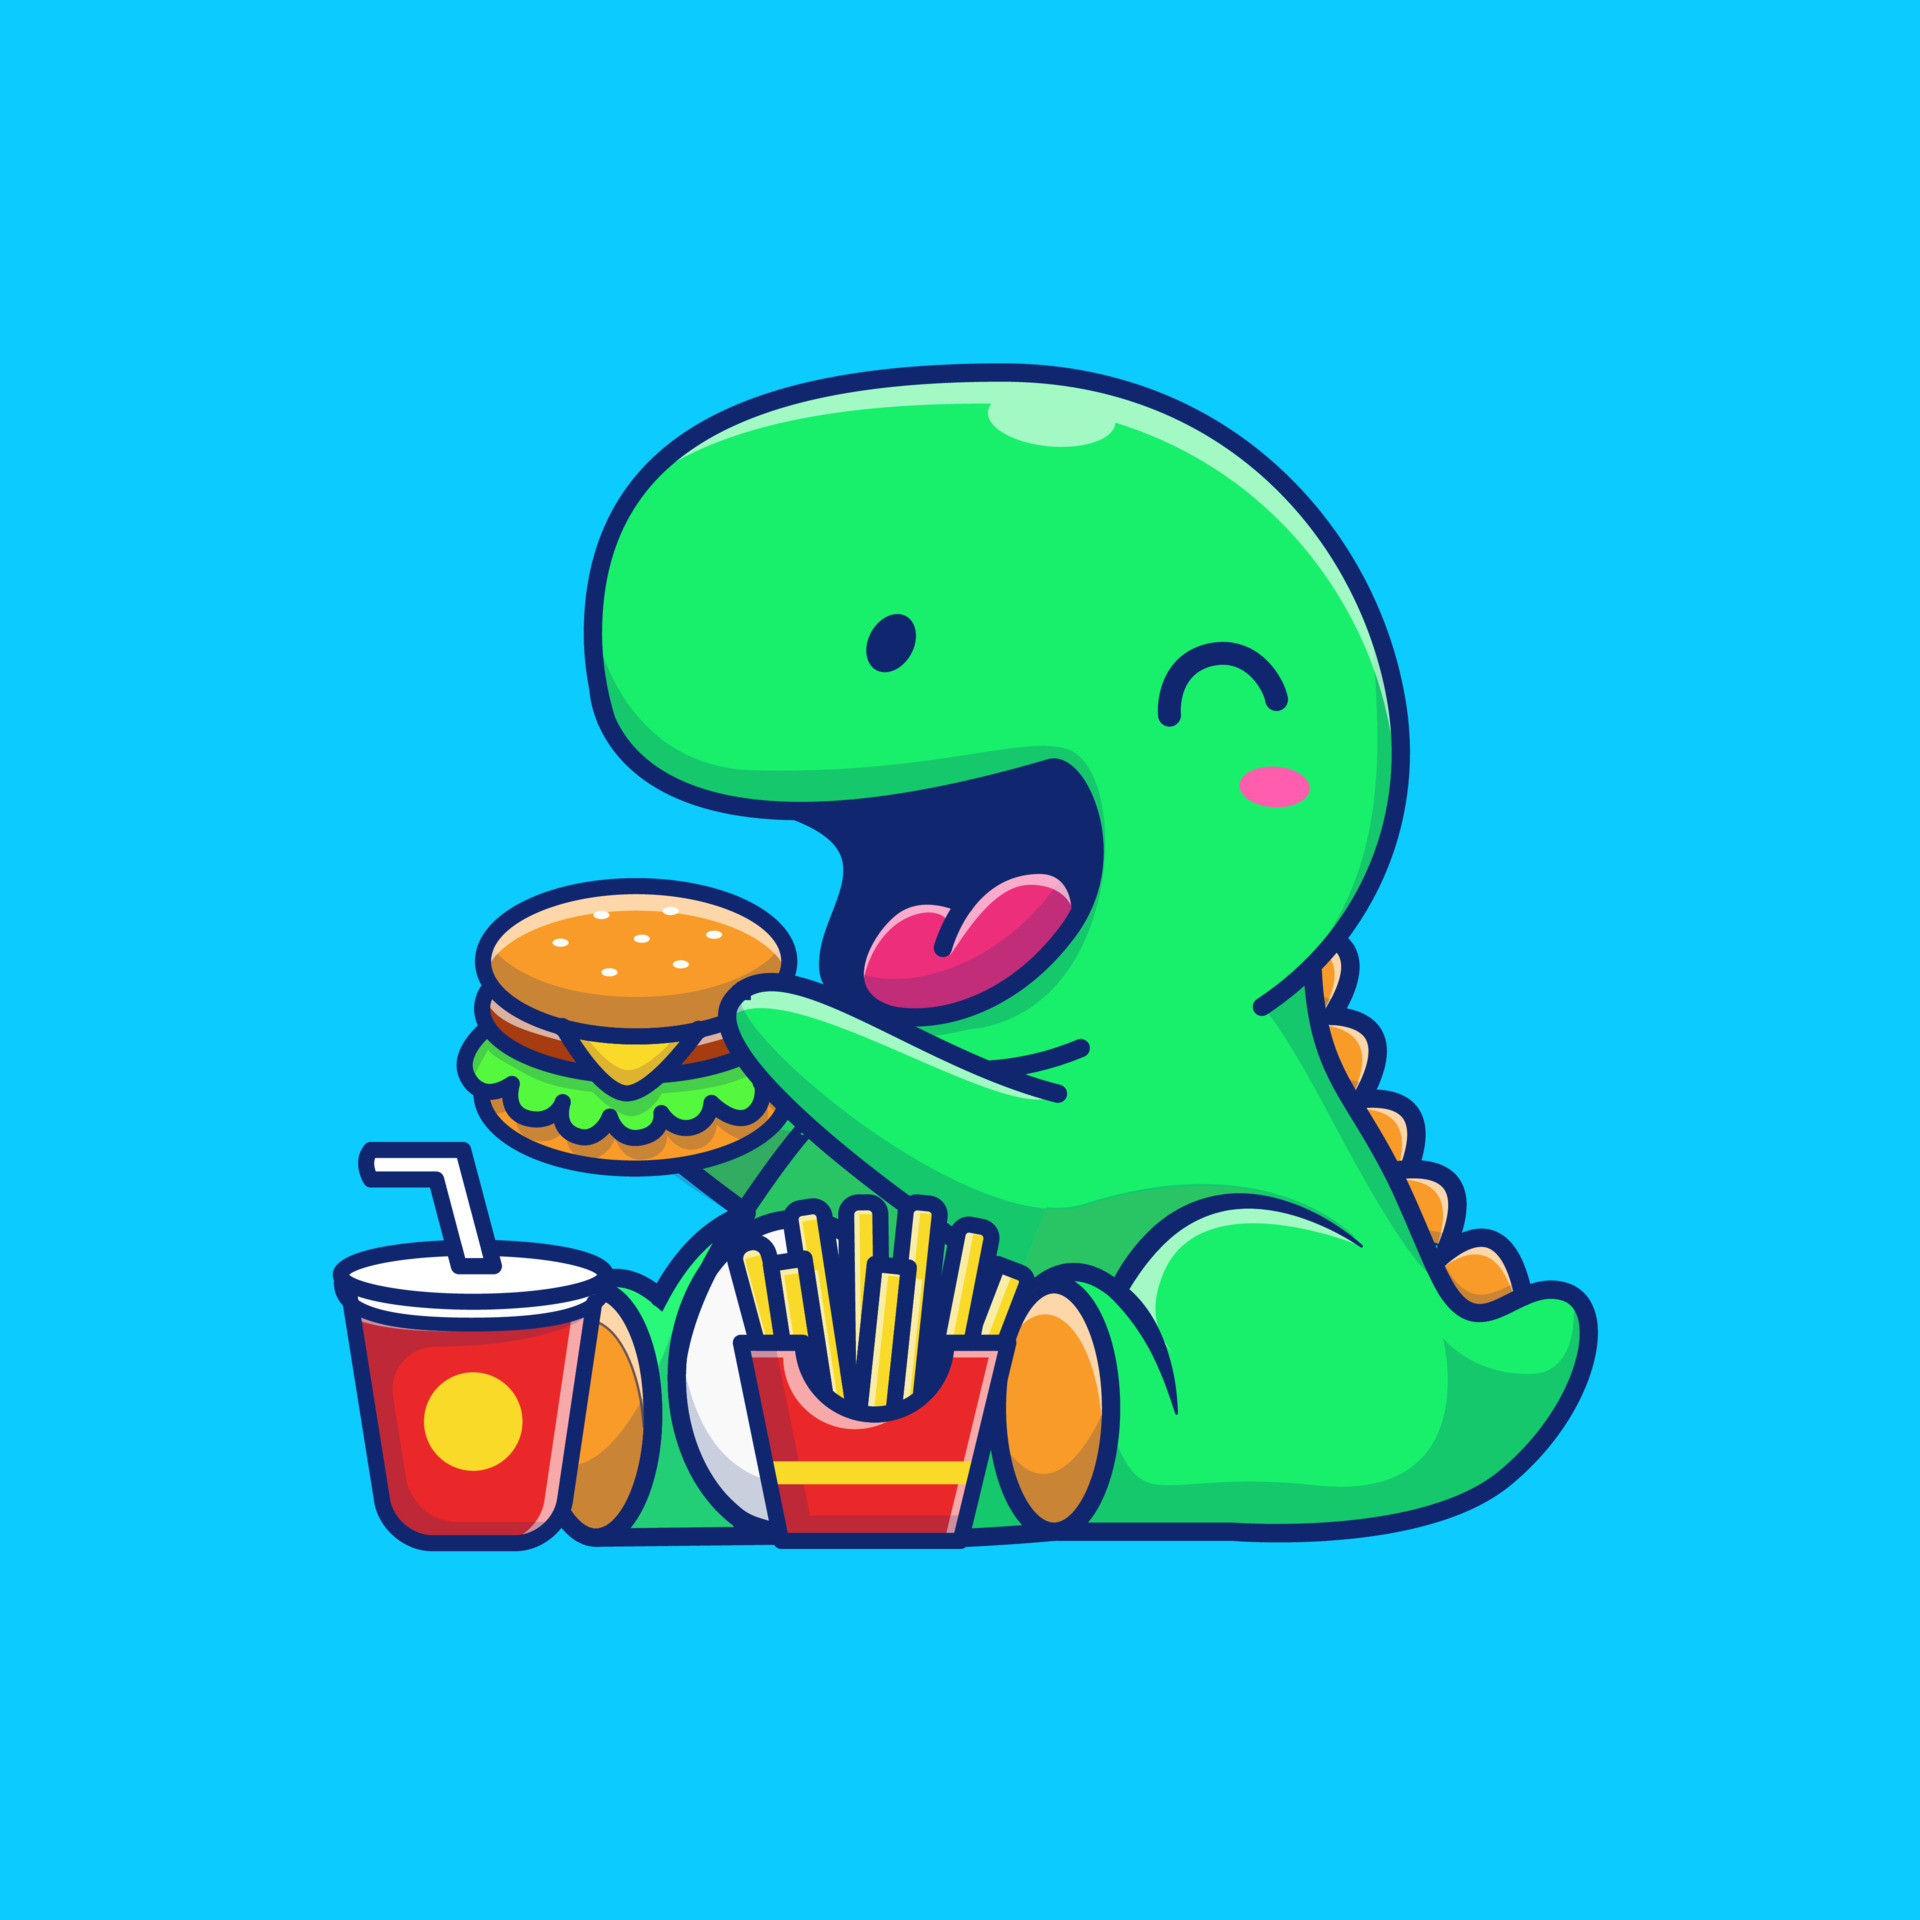 Cute Dinosaur Eating Burger, French Fries And Drink Cartoon Vector ...